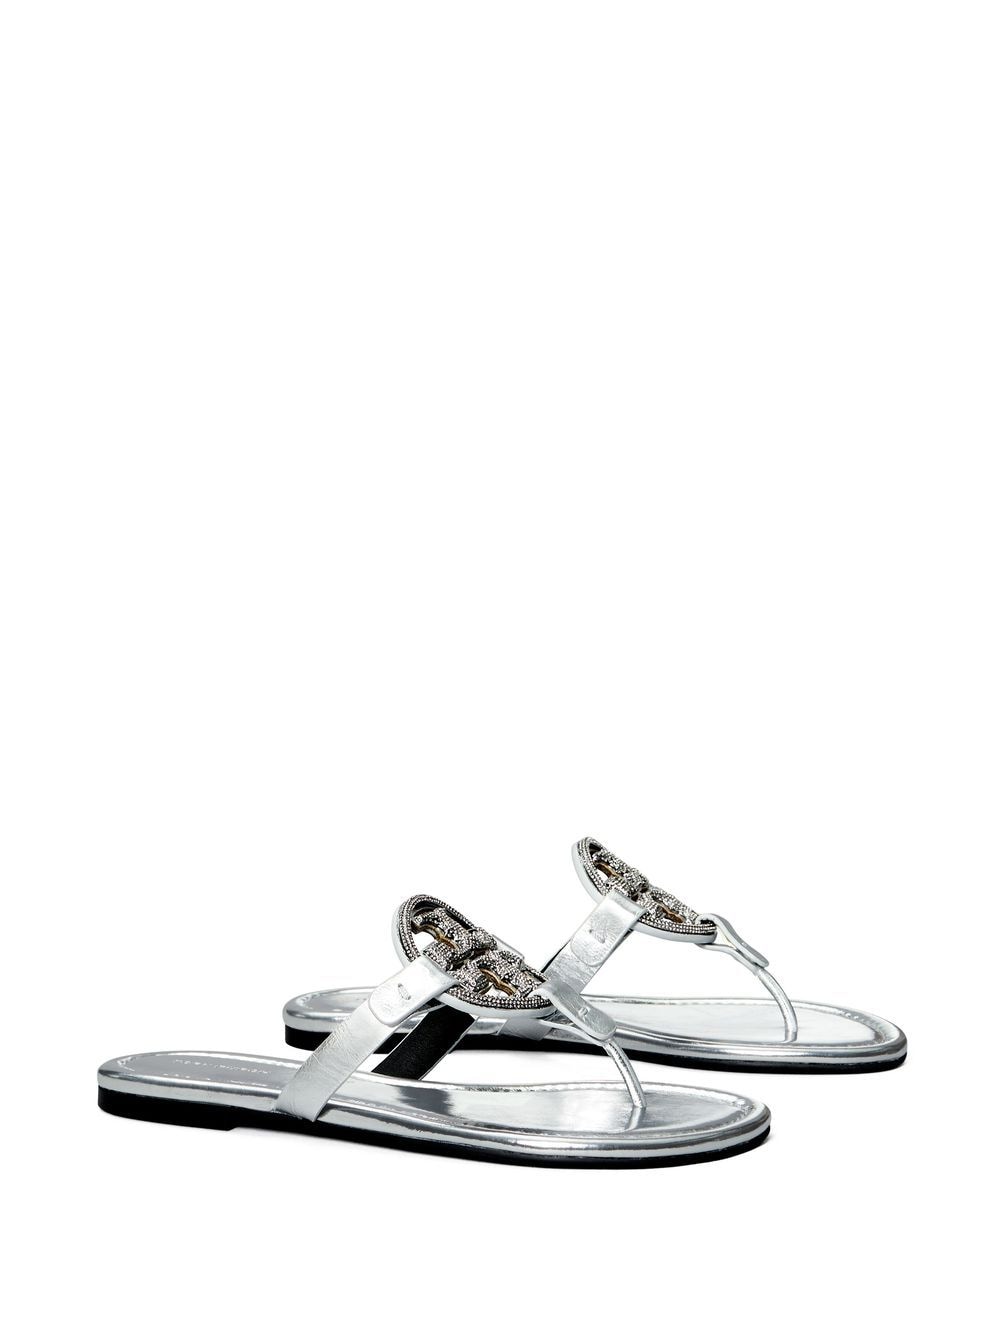 Tory Burch Miller Pave Logo Sandals In Silver | ModeSens